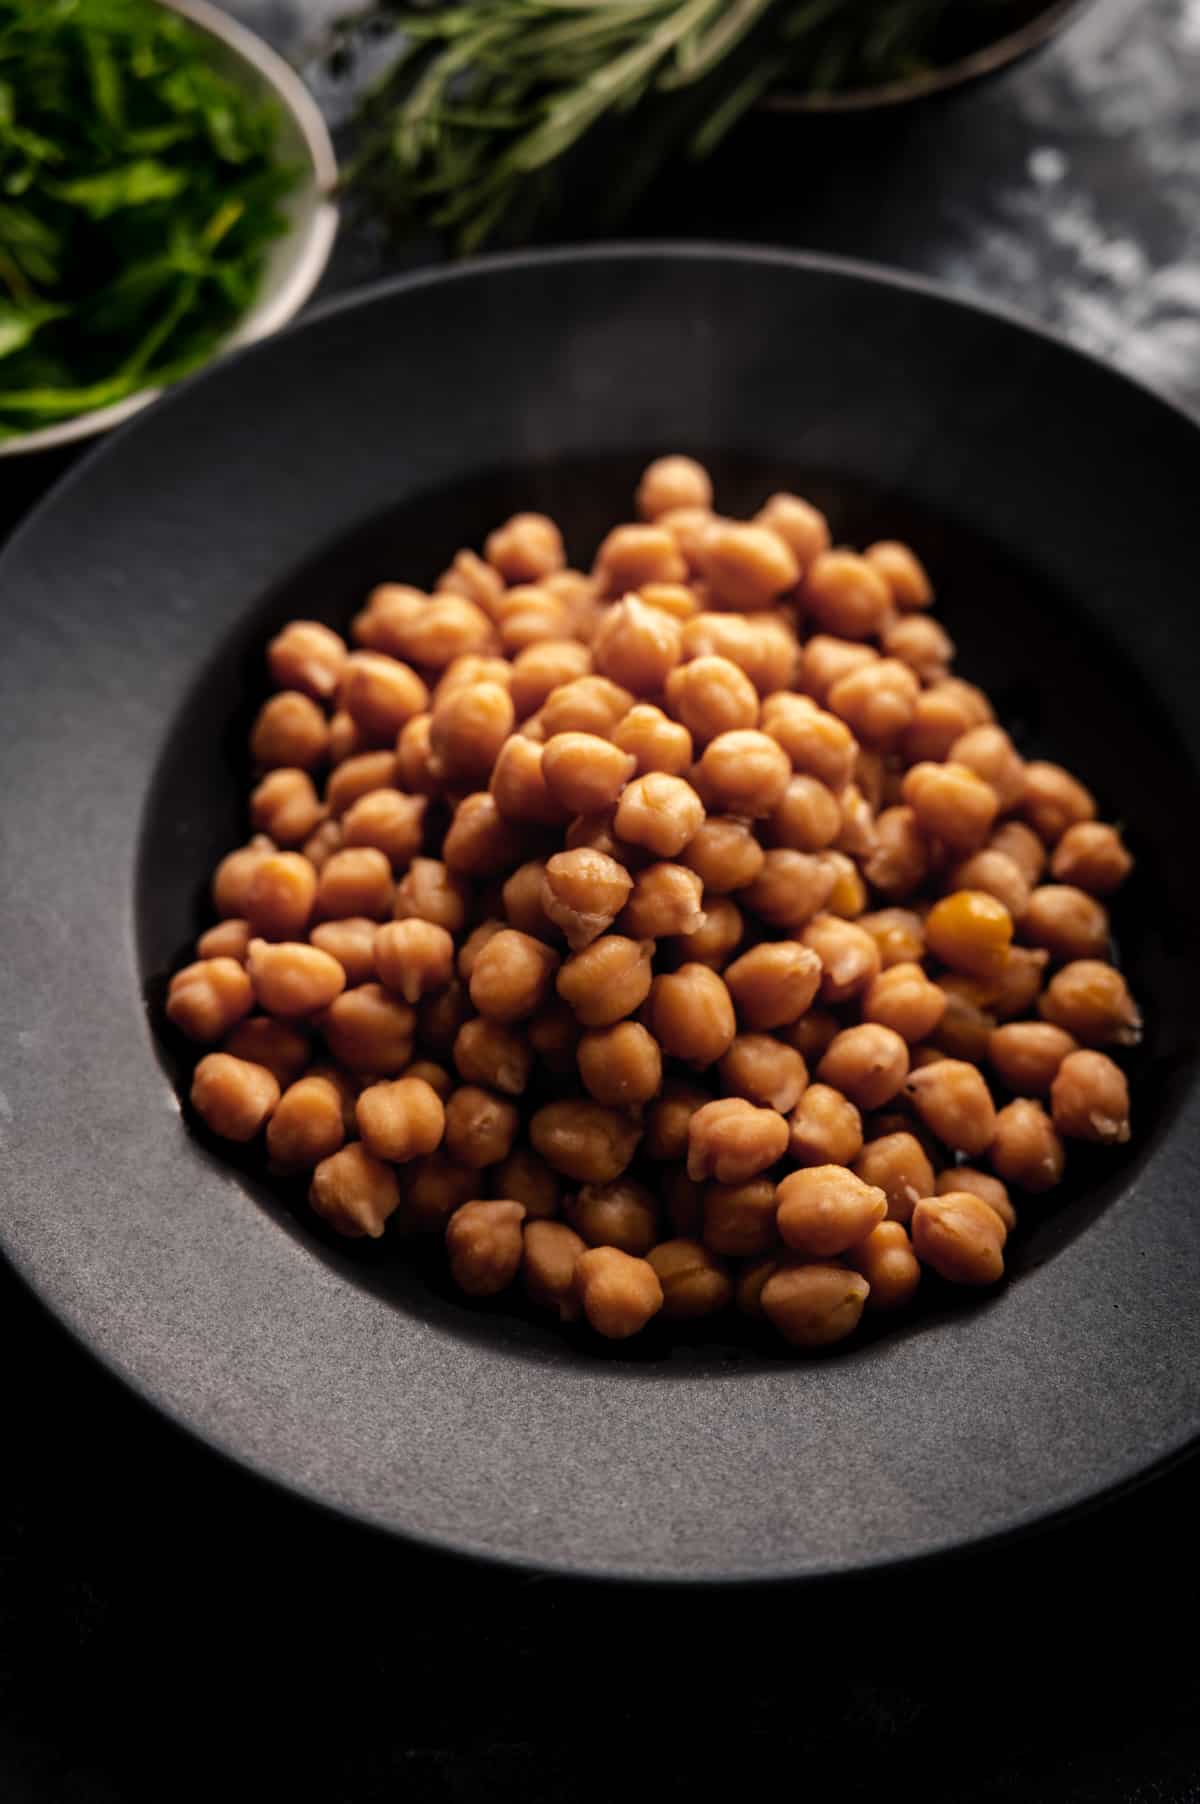 Close up of black plate with cooked garbanzo beans.